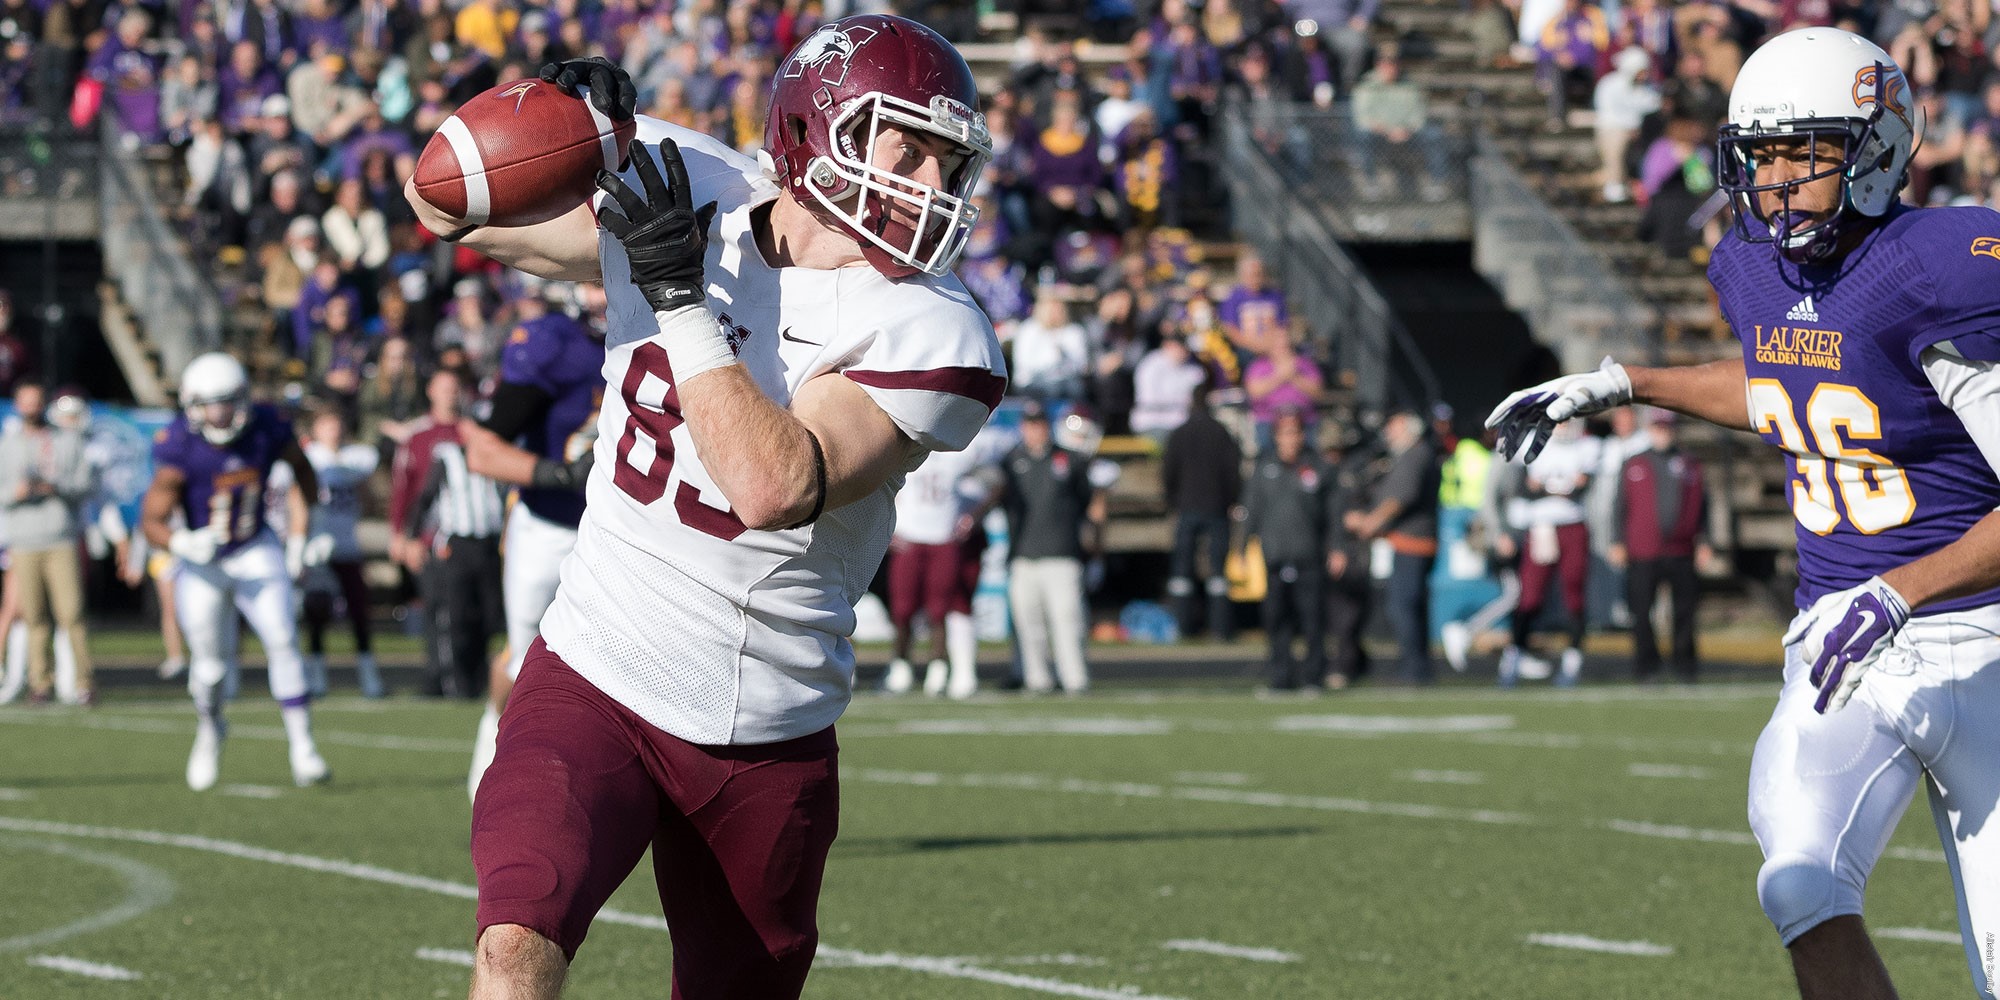 CFL Canadian Draft: McMaster’s Vandervoort selected third overall, 56 U SPORTS players drafted